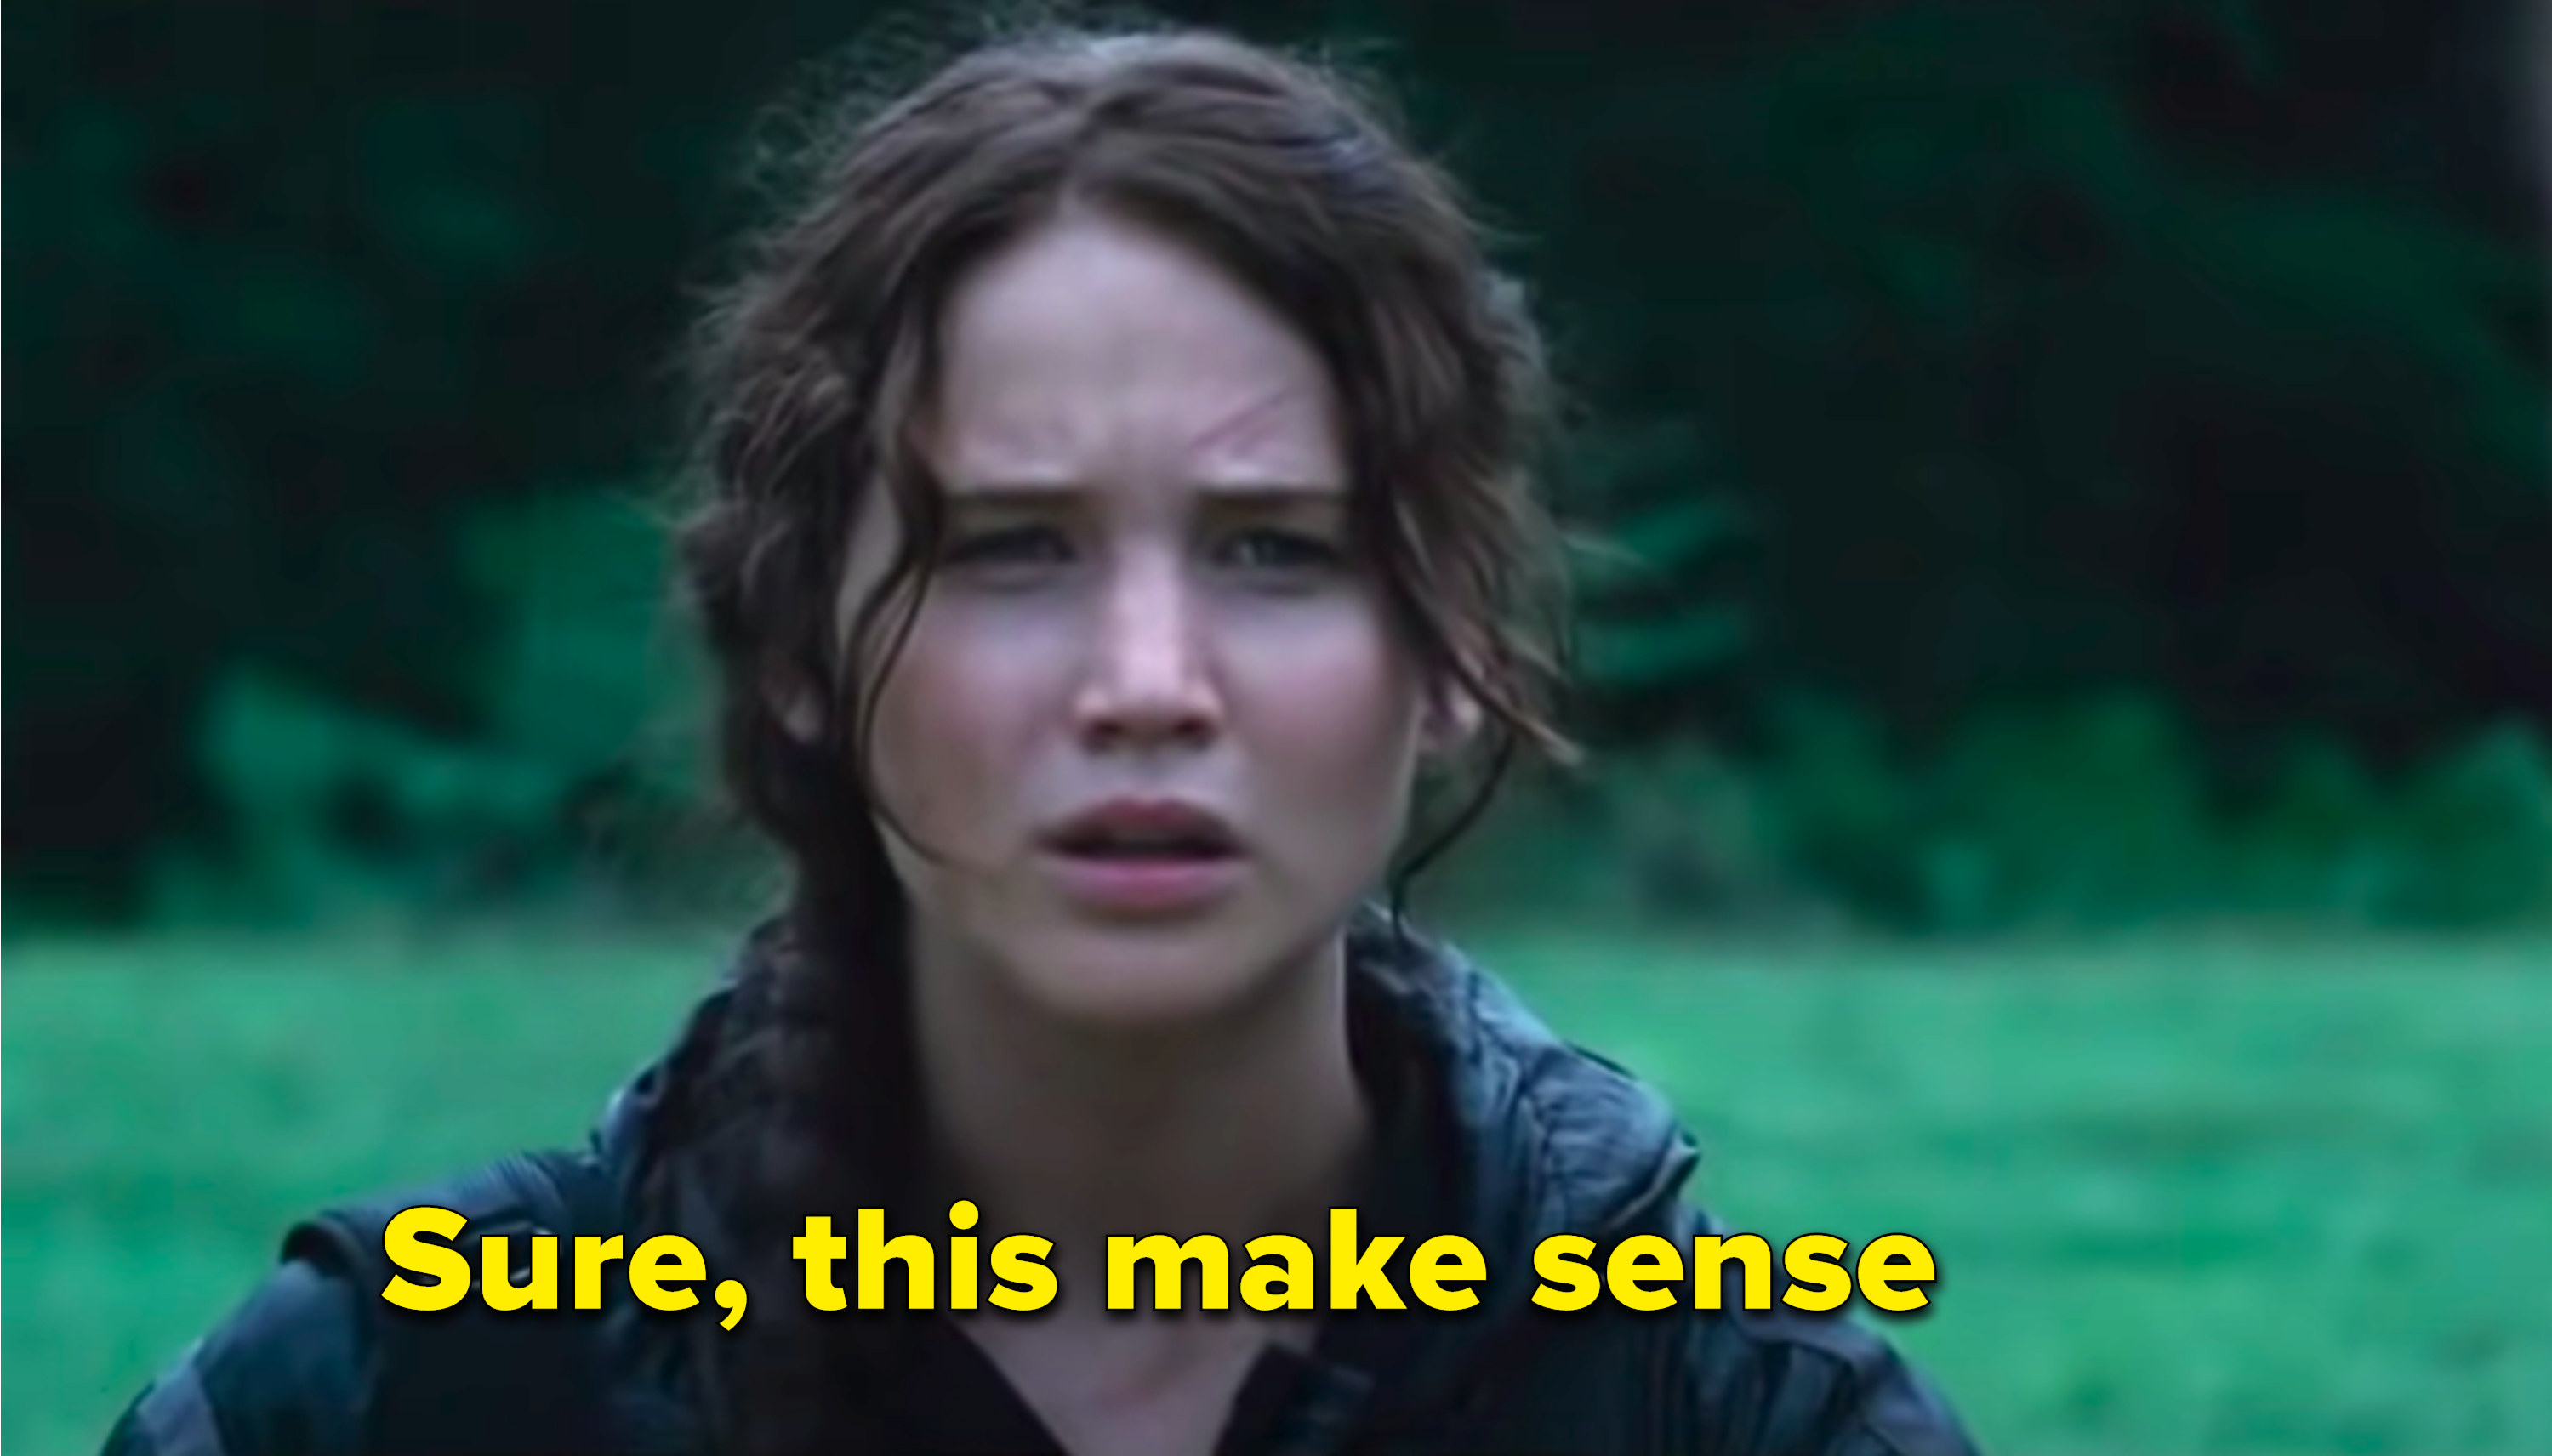 &quot;Sure, this makes sense,&quot; written over Katniss in &quot;The Hunger Games&quot;